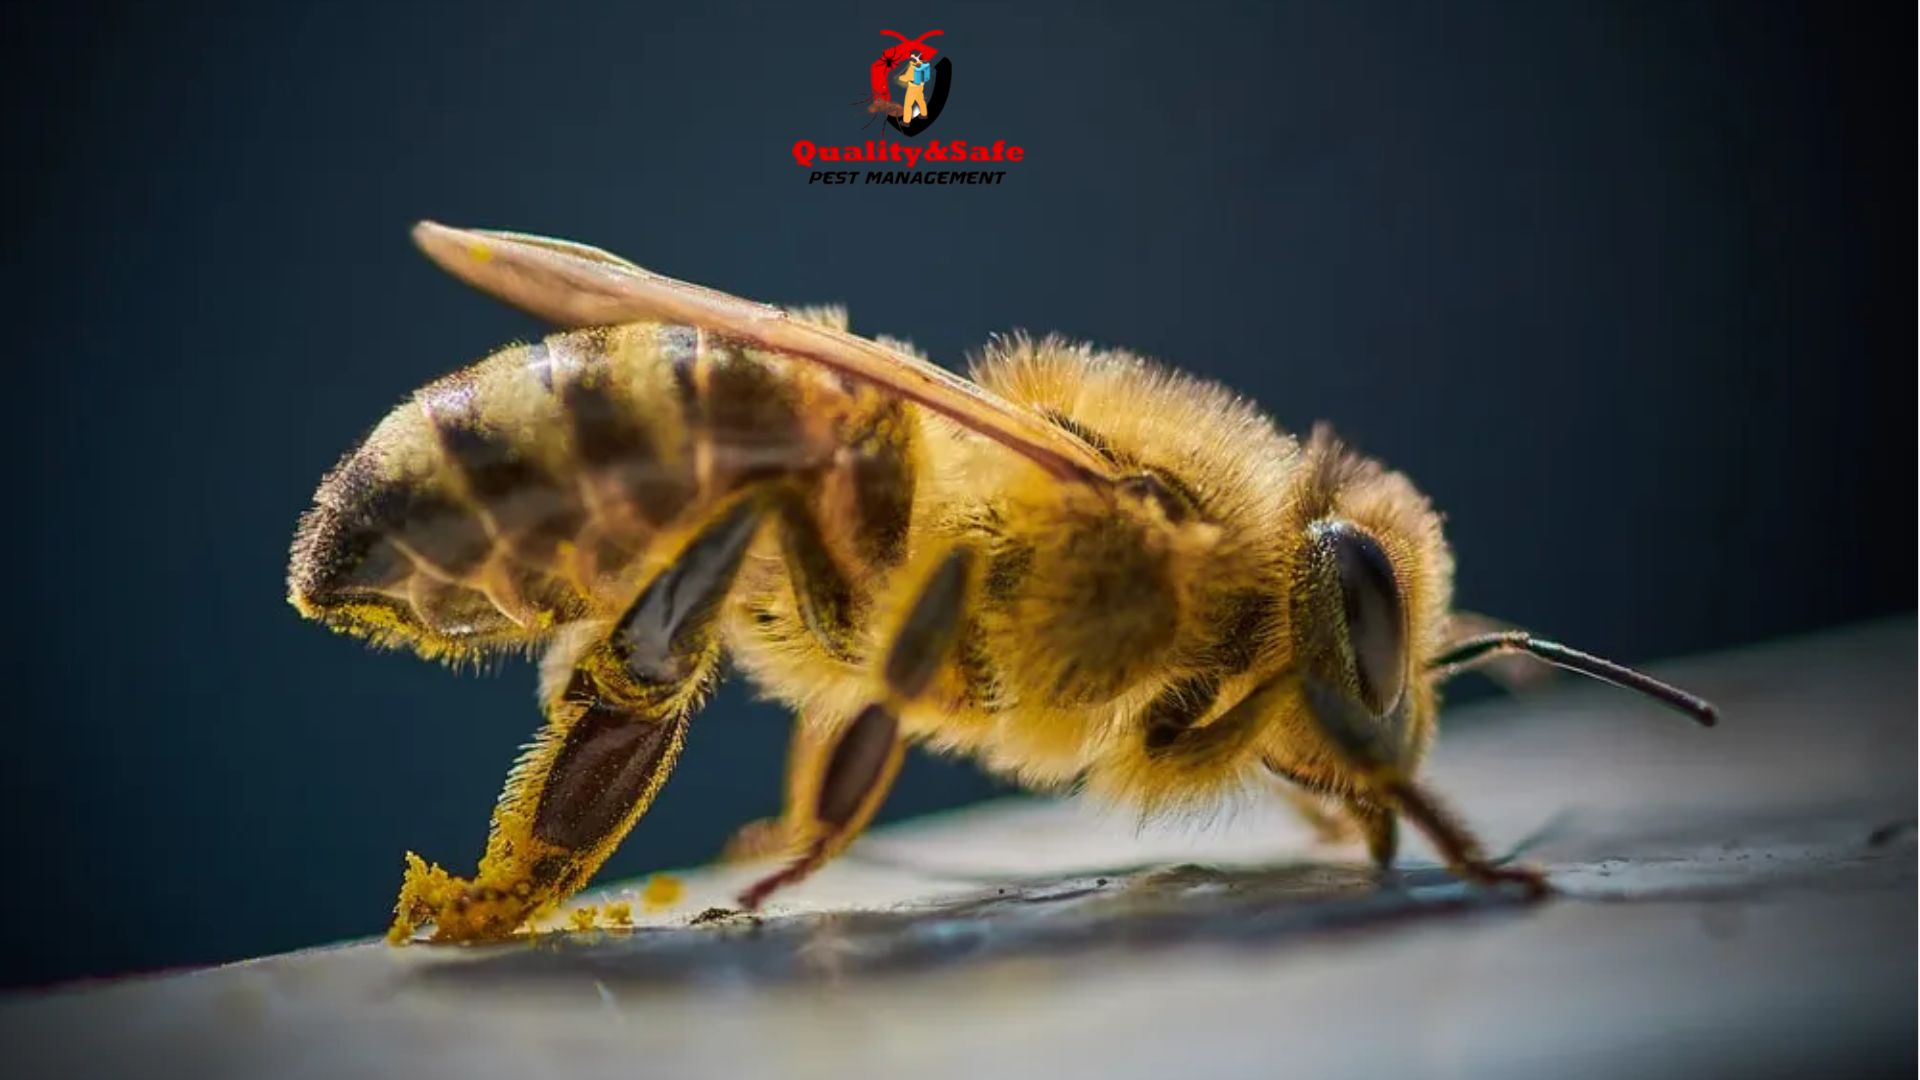 Why Have Bees Invaded Your Home and How Can You Get Rid of Them? | qspestcontrol